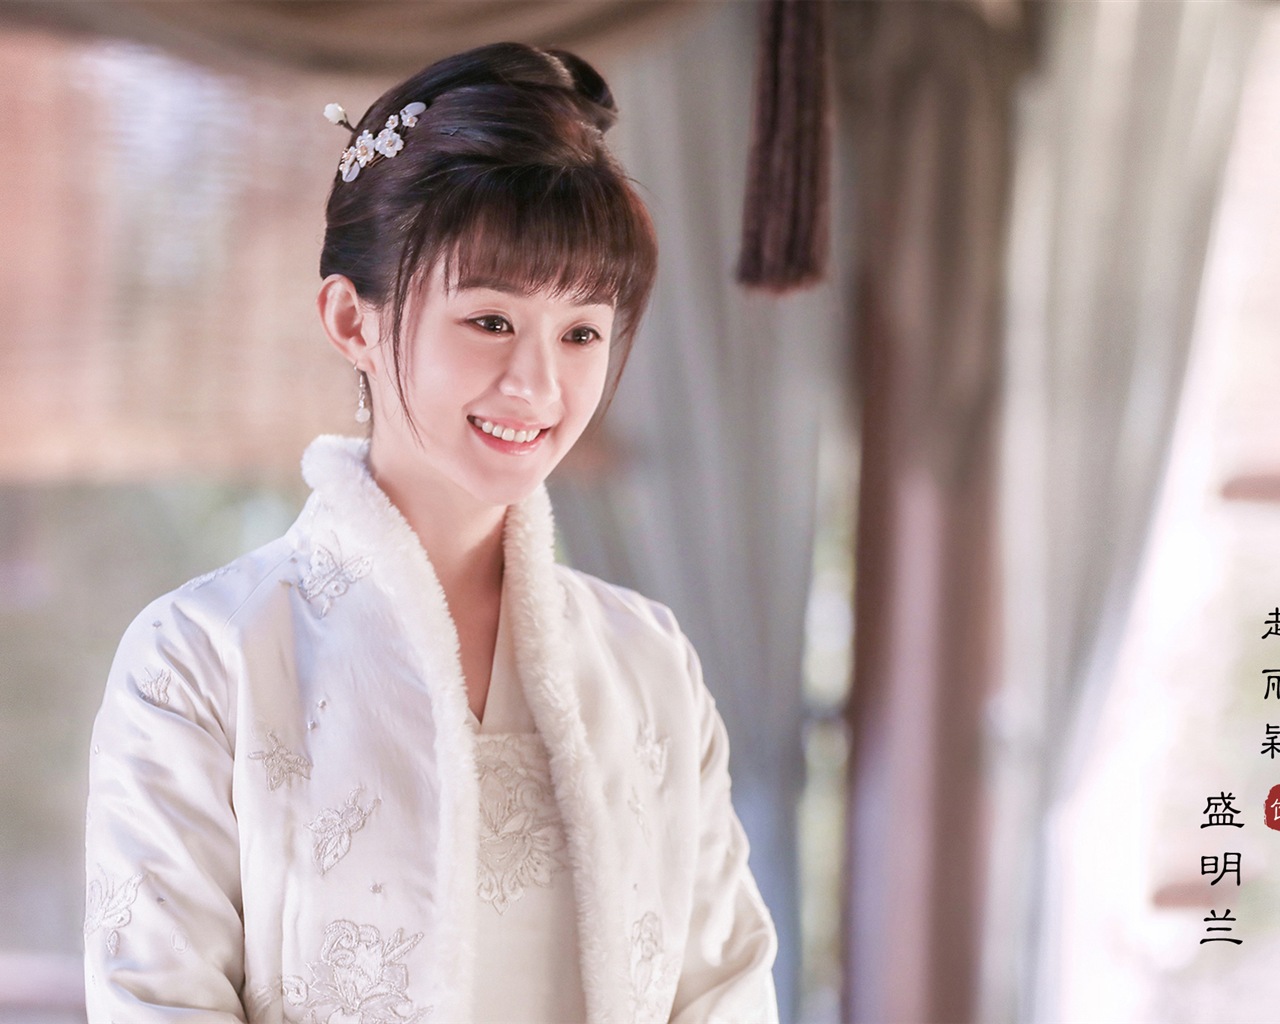 The Story Of MingLan, TV series HD wallpapers #28 - 1280x1024